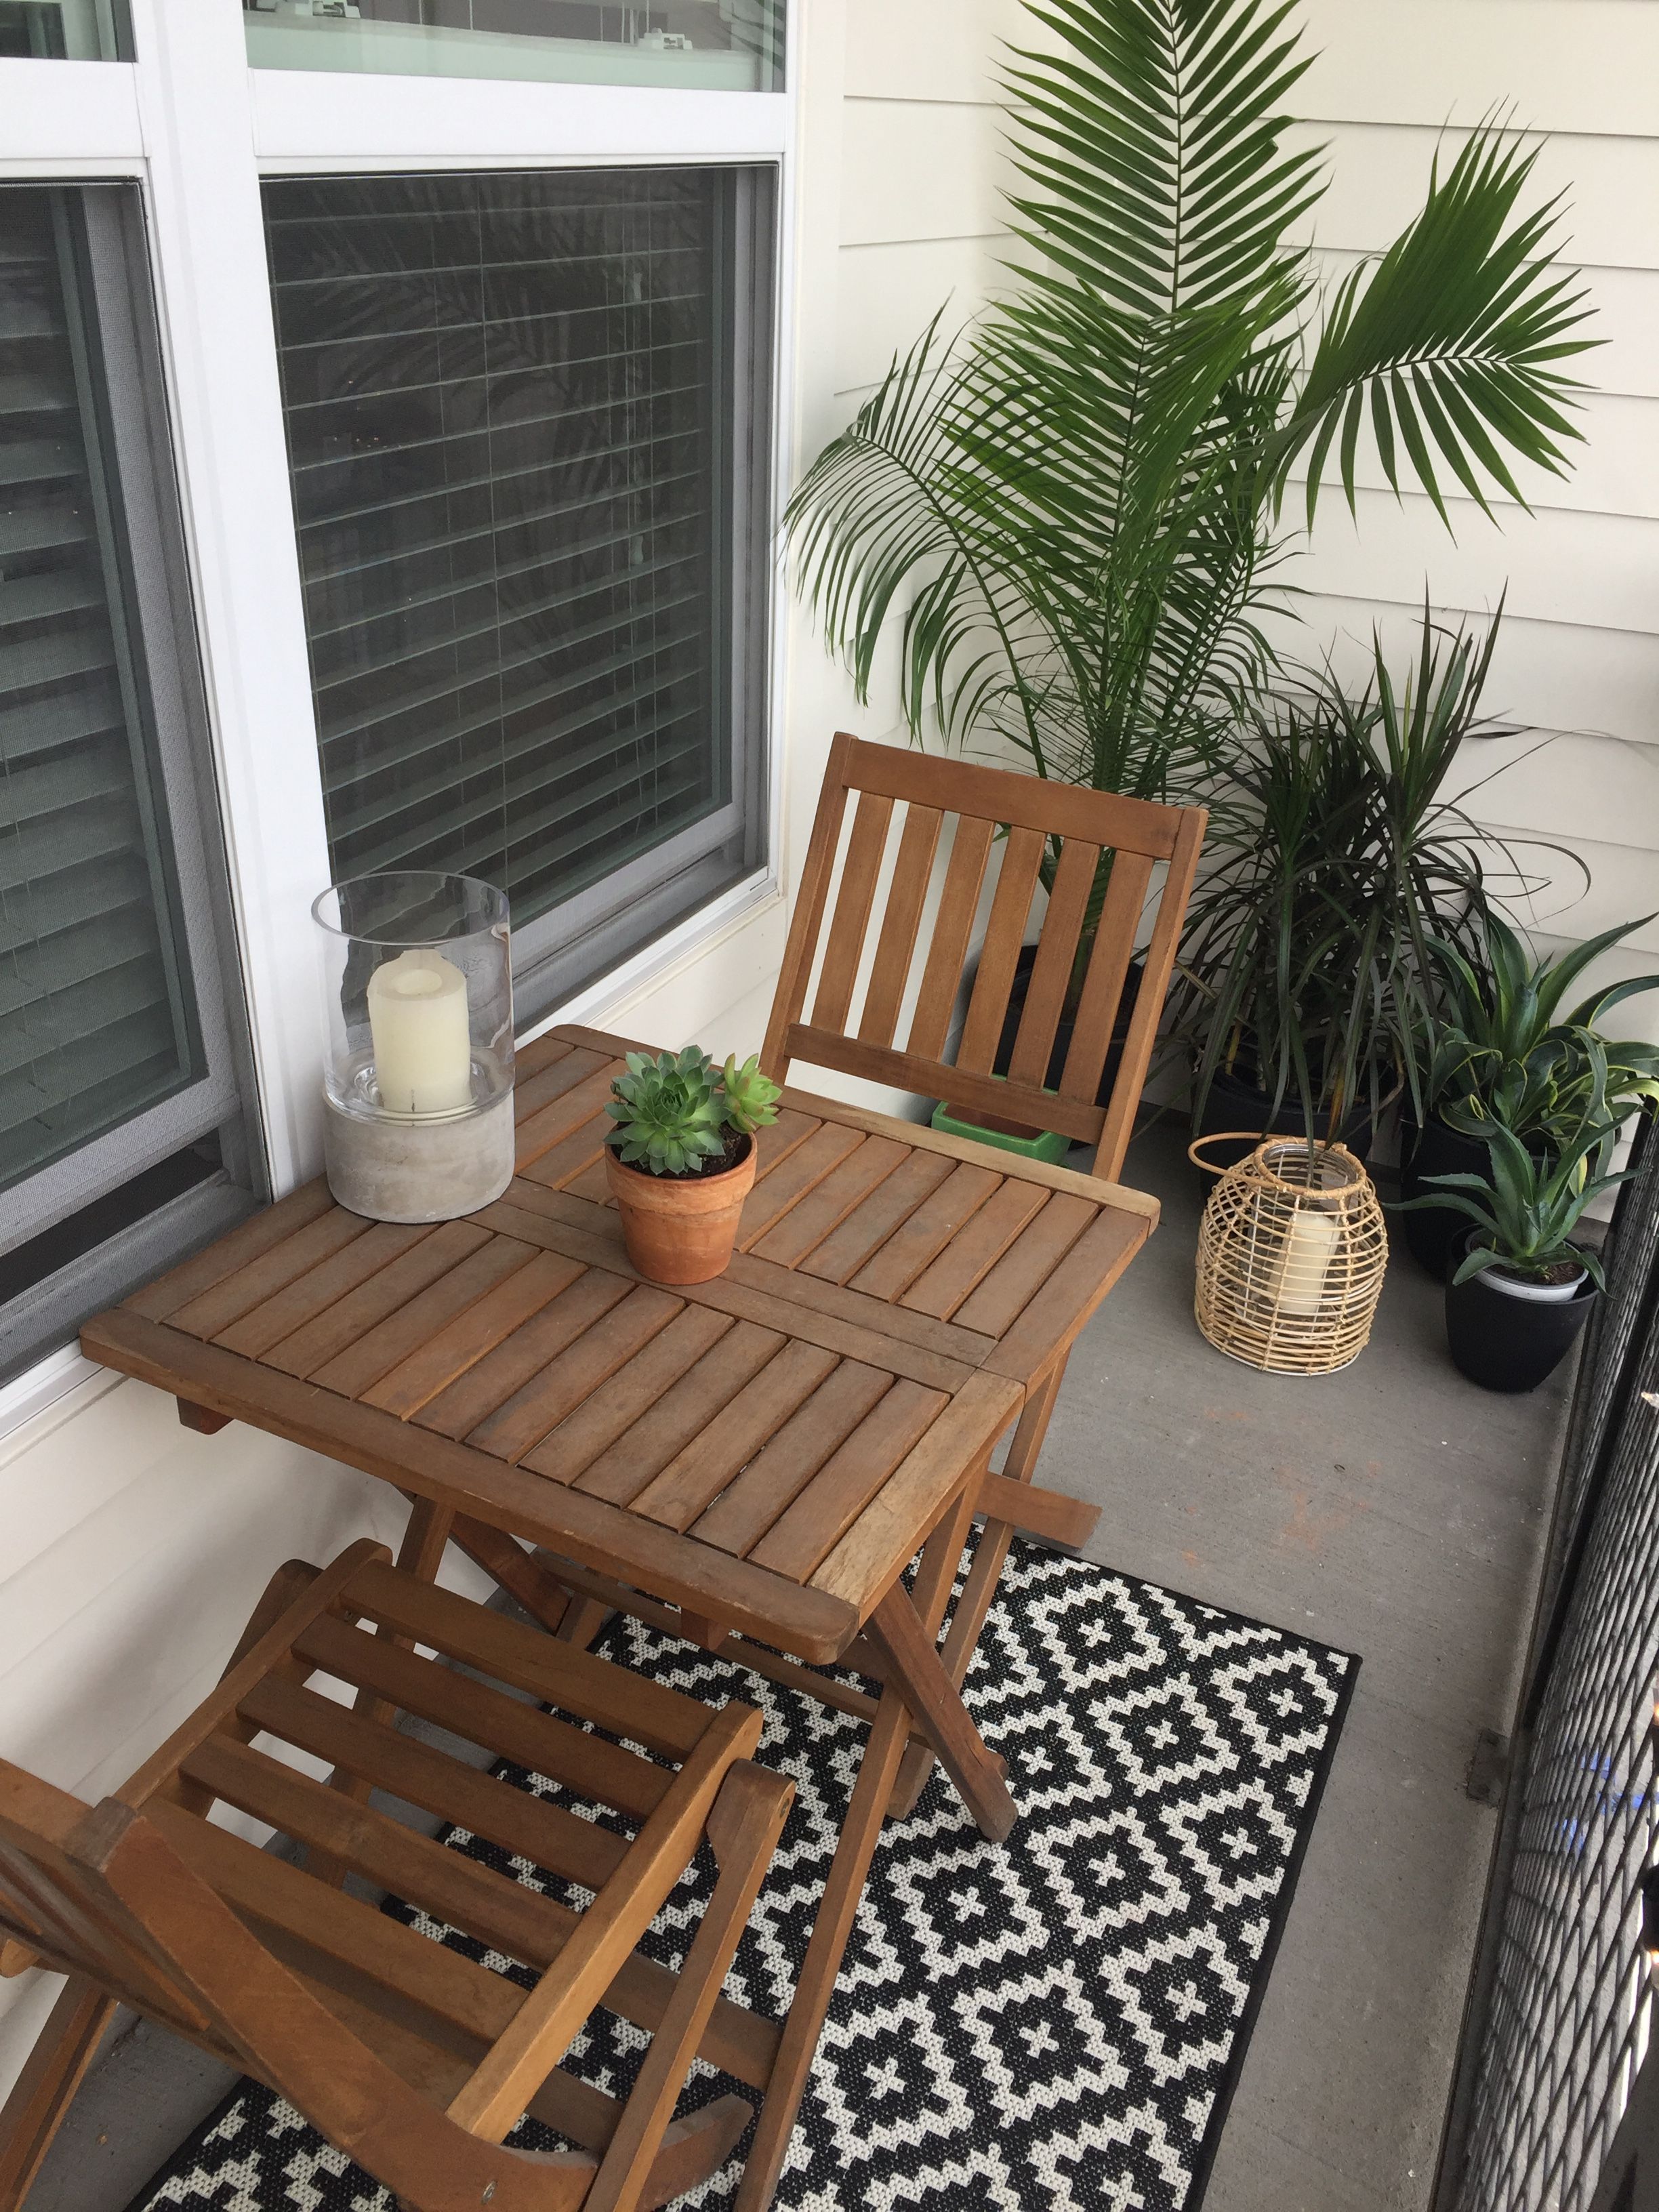 Small balcony design and decor ideas. Small garden. Target and World Market furniture. Succulents and candles. -   24 simple balcony decor
 ideas